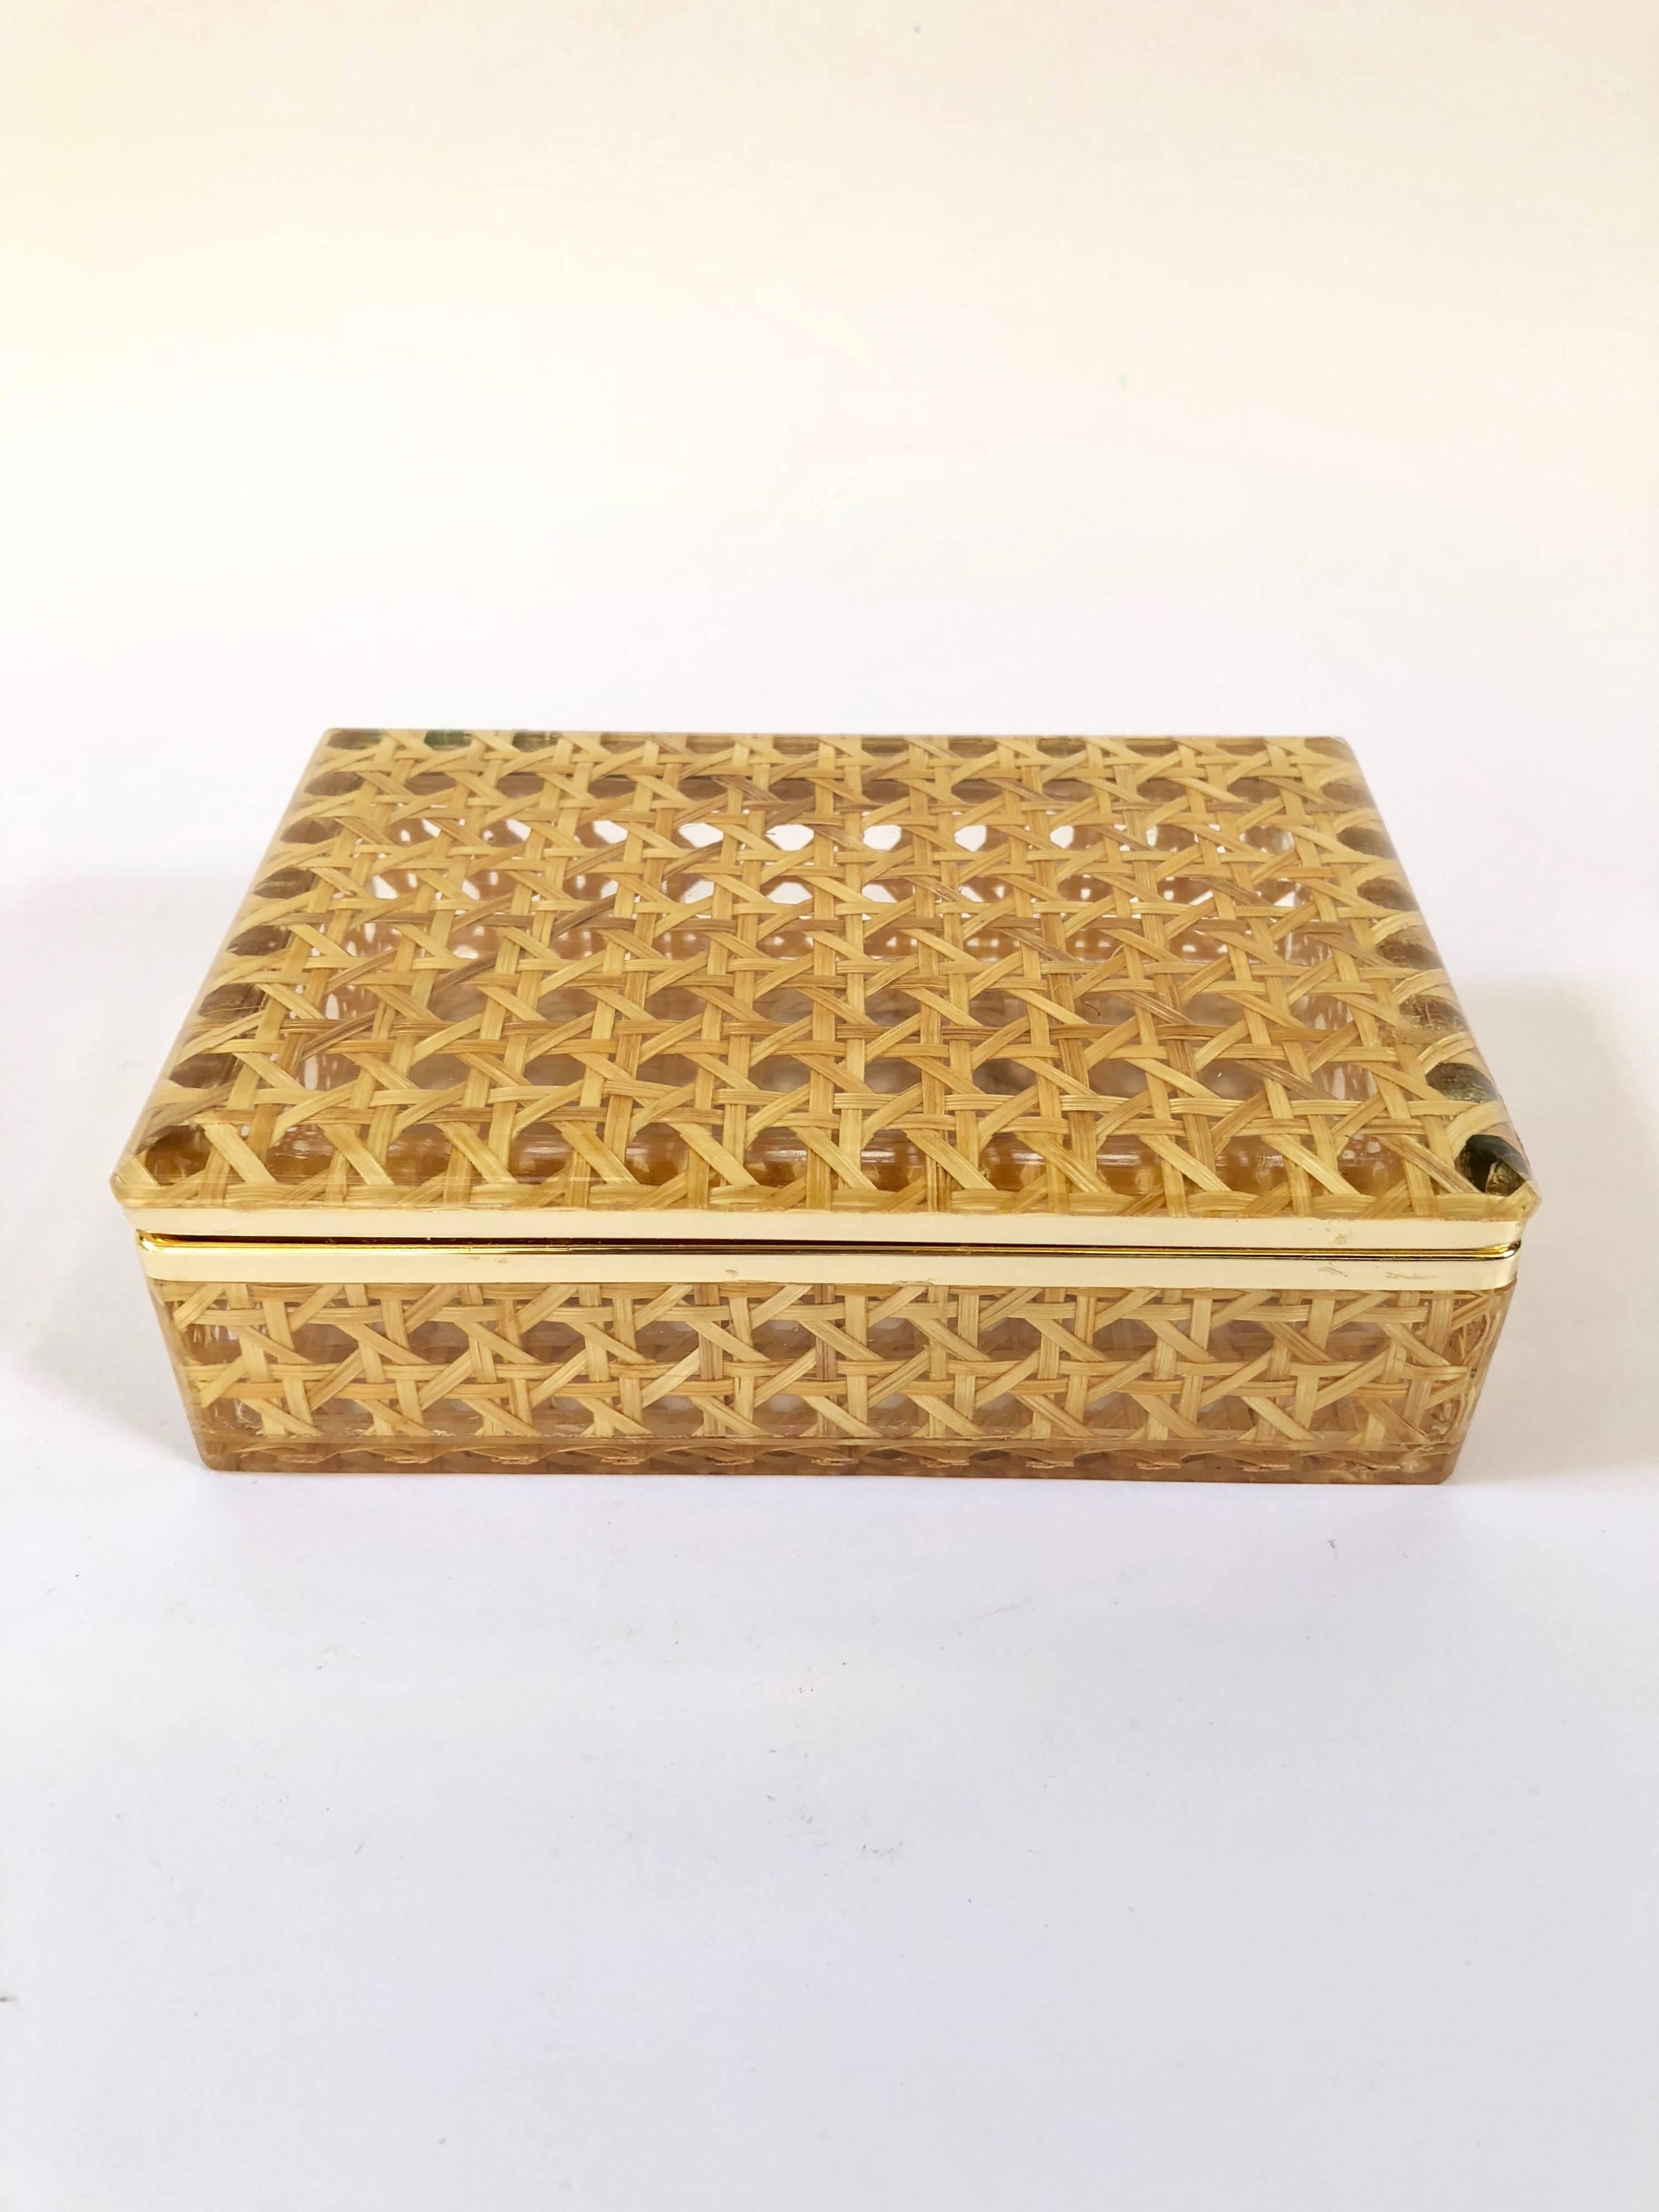 Amazing and useful box in Lucite embellished in plasticized wicker.